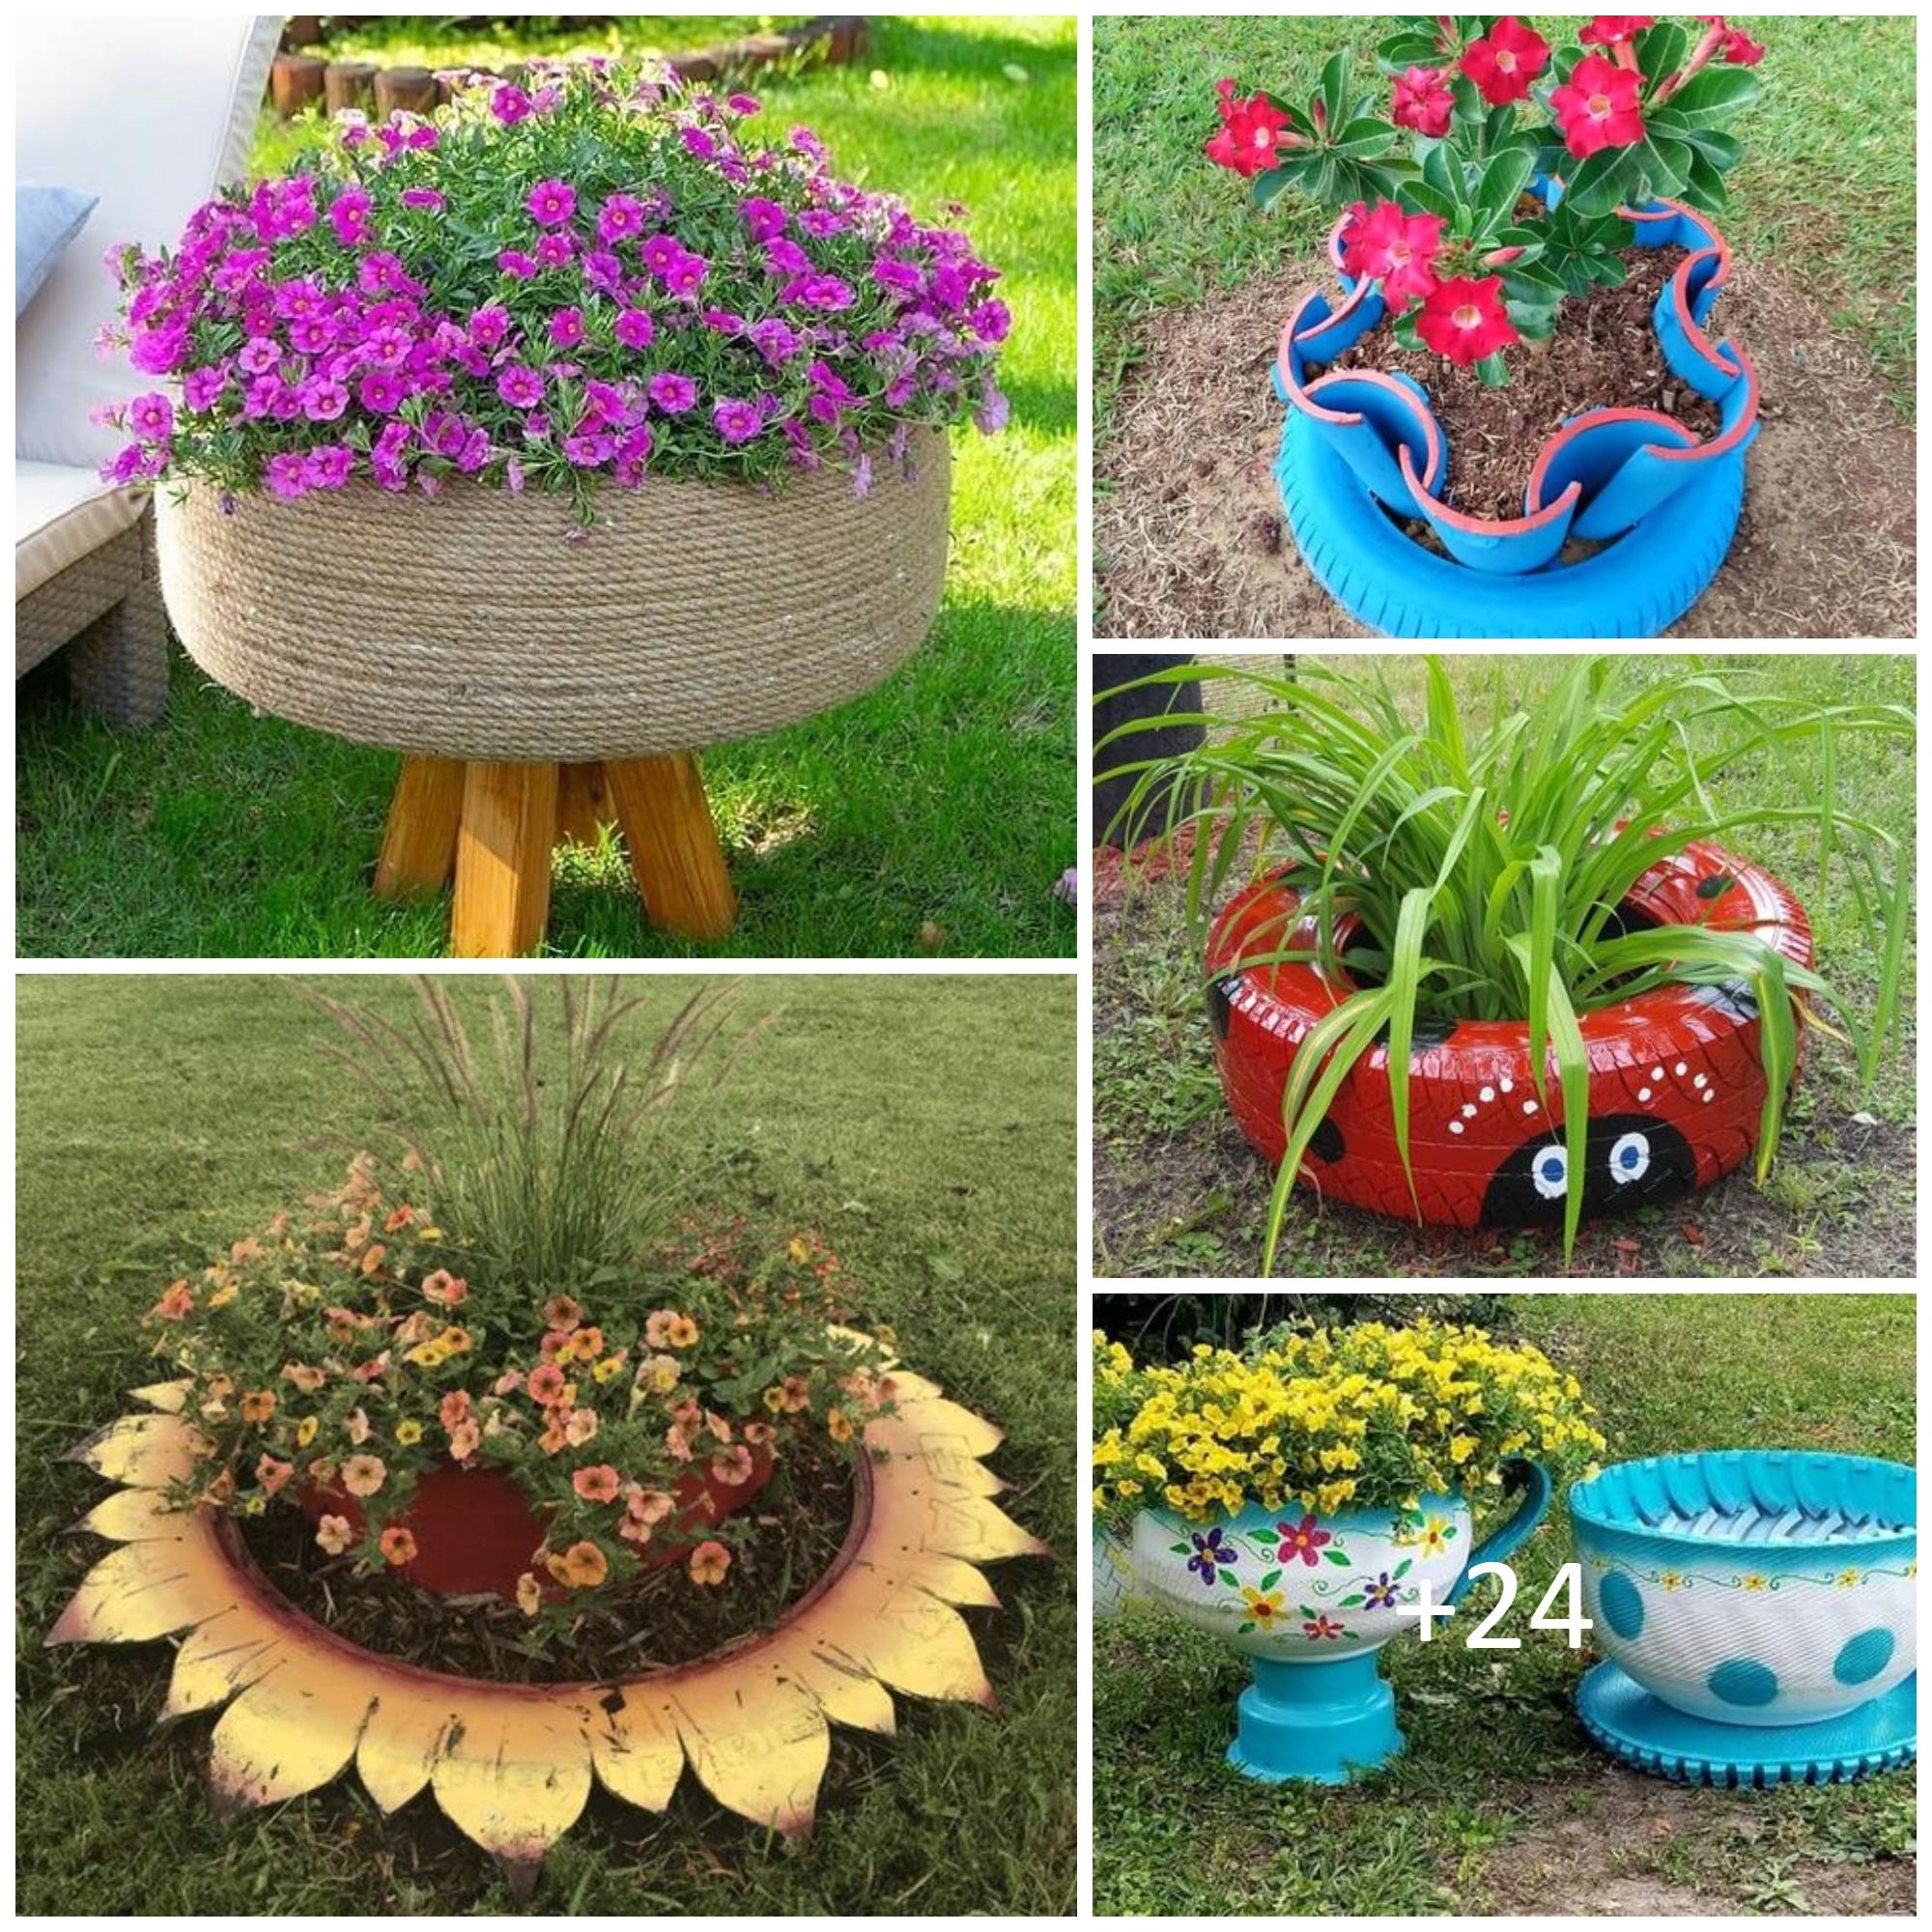 Adorable DIY Tire Planter Ideas That Will Make Your Garden the Cutest on the Block